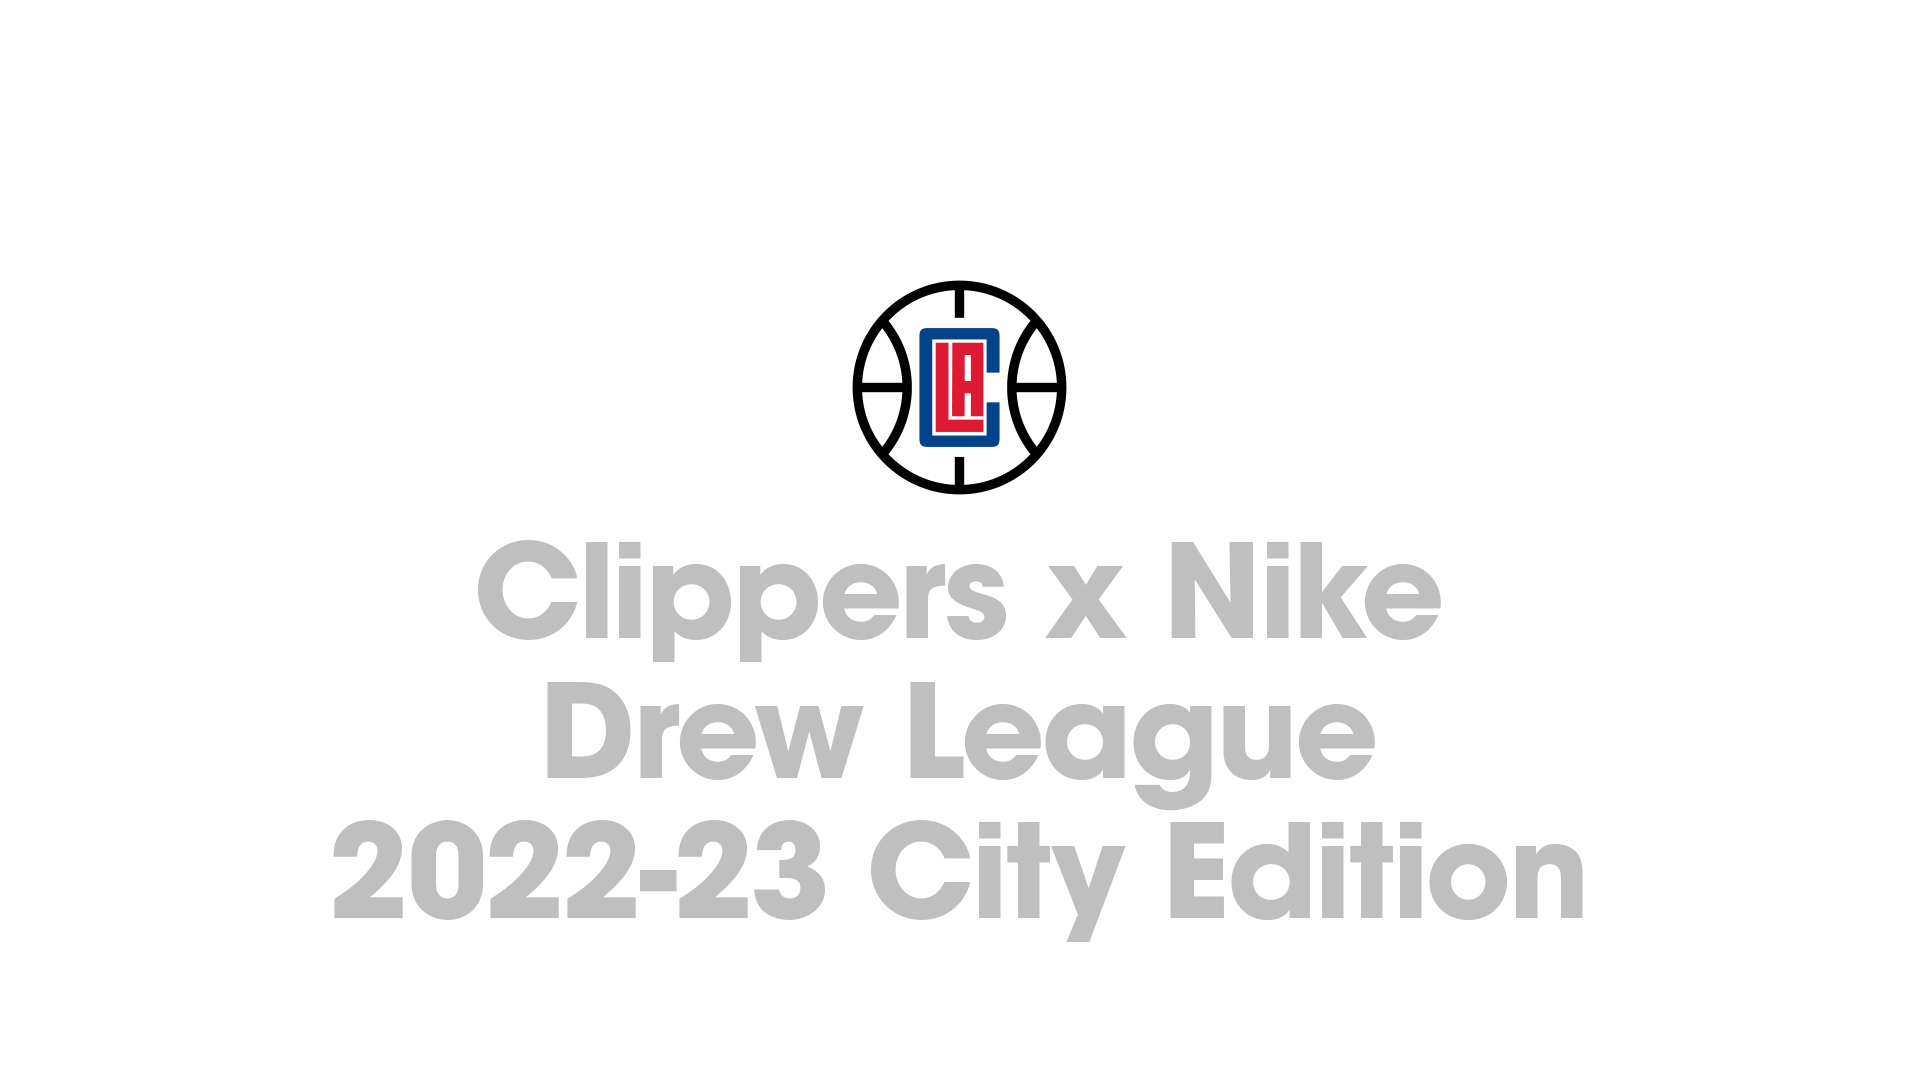 Clippers x Nike Drew League 2022-23 City Edition